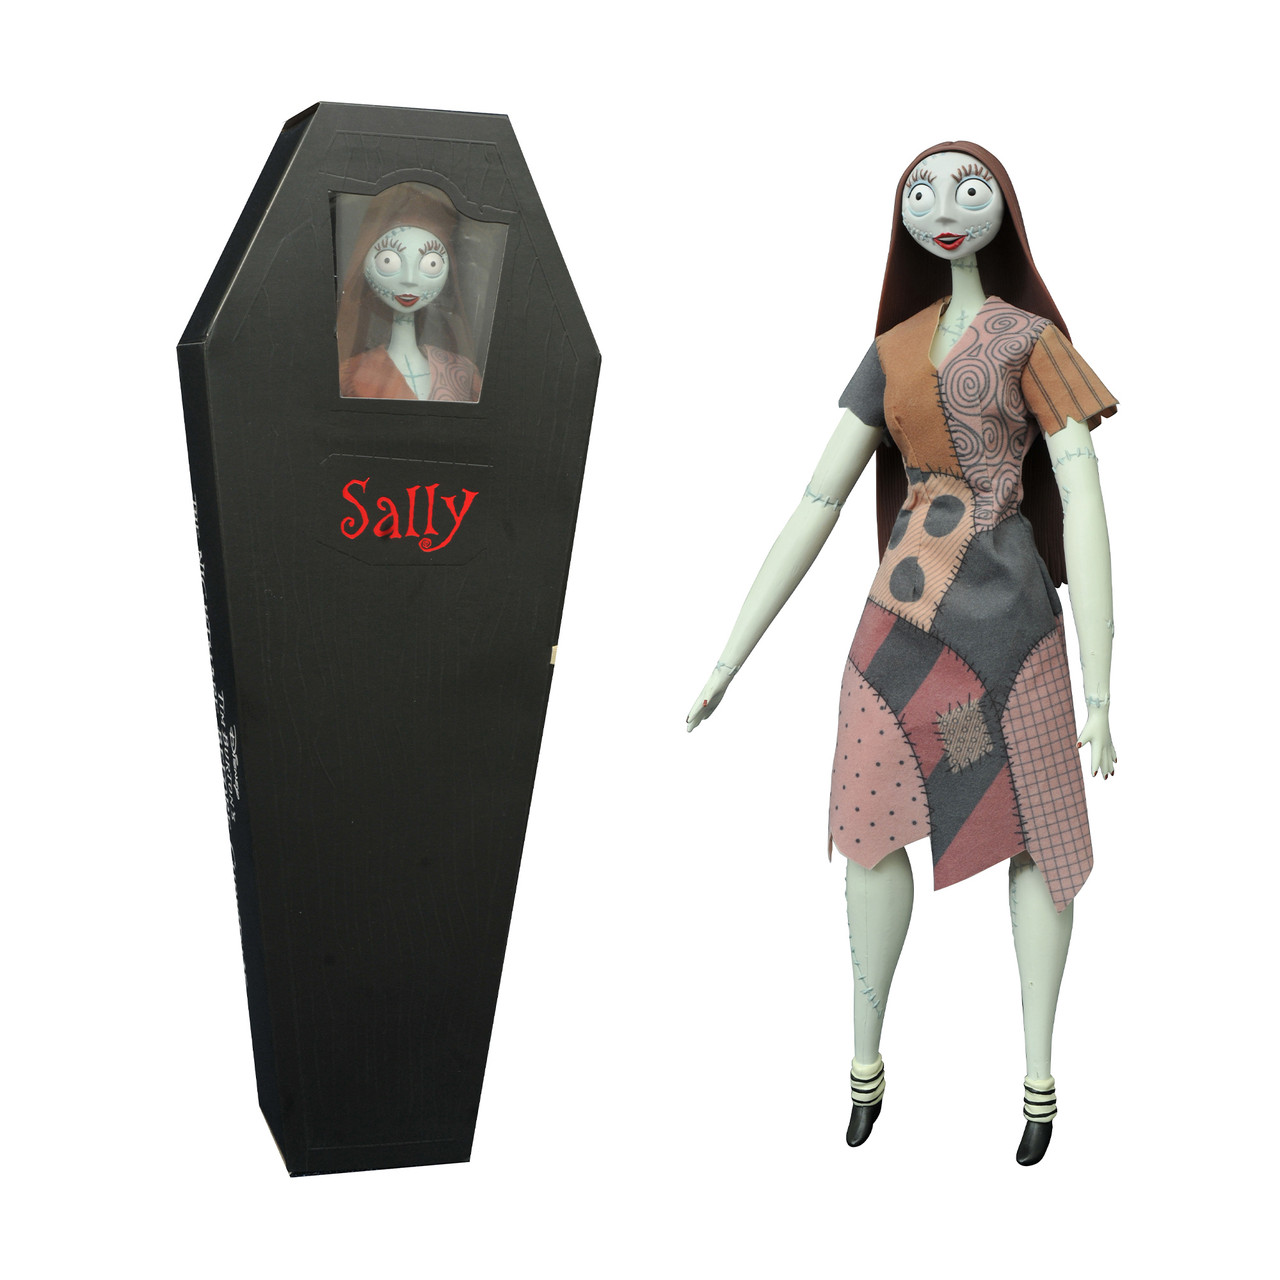 Sally (Unlimited) Coffin Doll - Diamond Select Toys